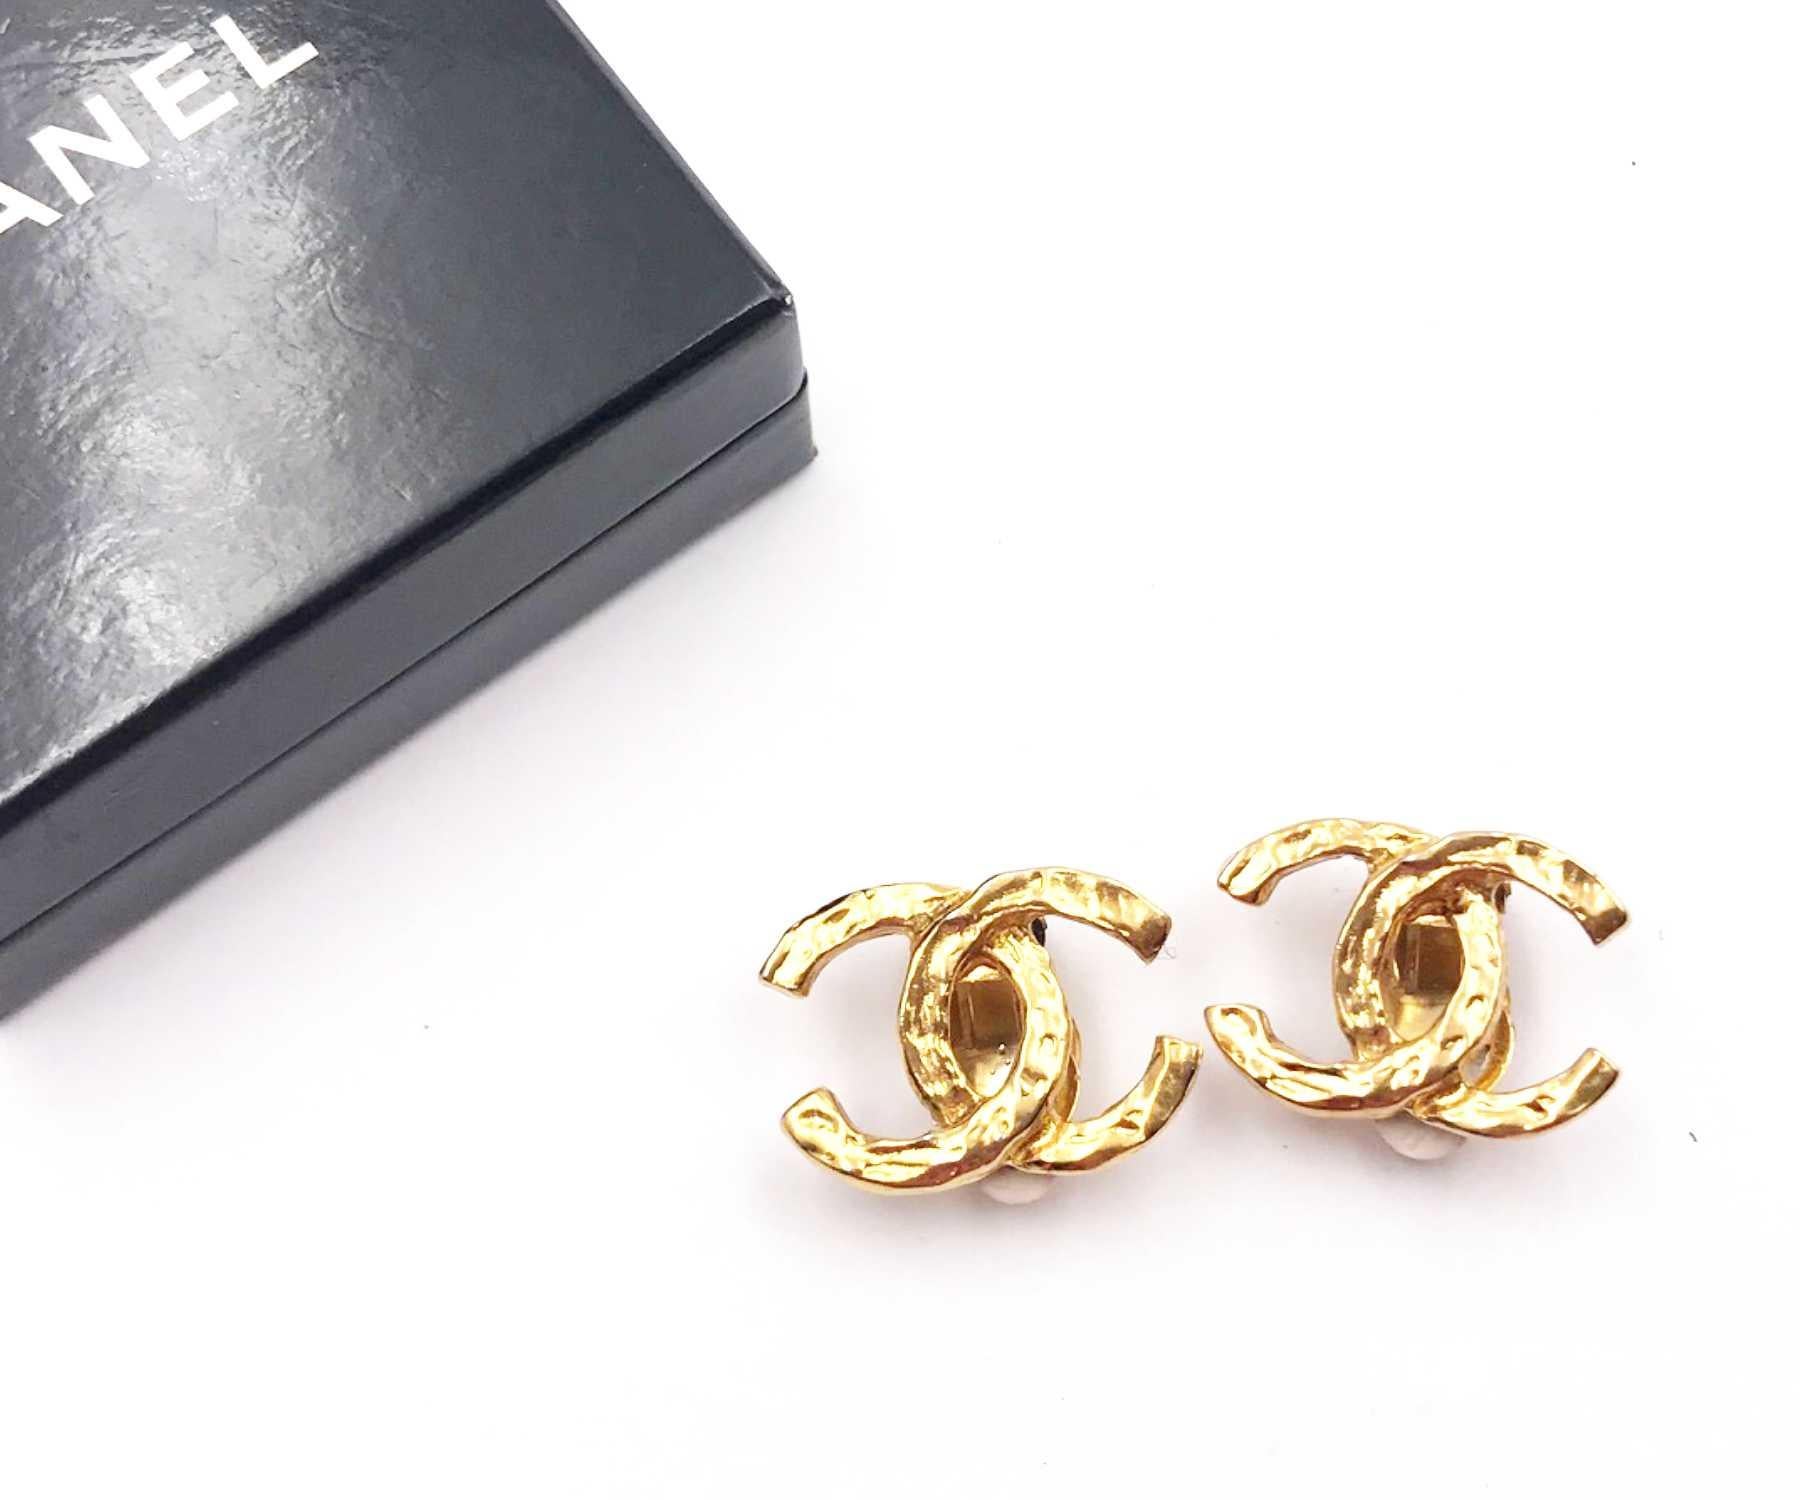 Chanel Vintage Gold Plated Hammered Texture CC Clip on Earrings

* Marked Chanel ( during 70s)
* Made in France
* Comes with the original box

-It is approximately 1.1